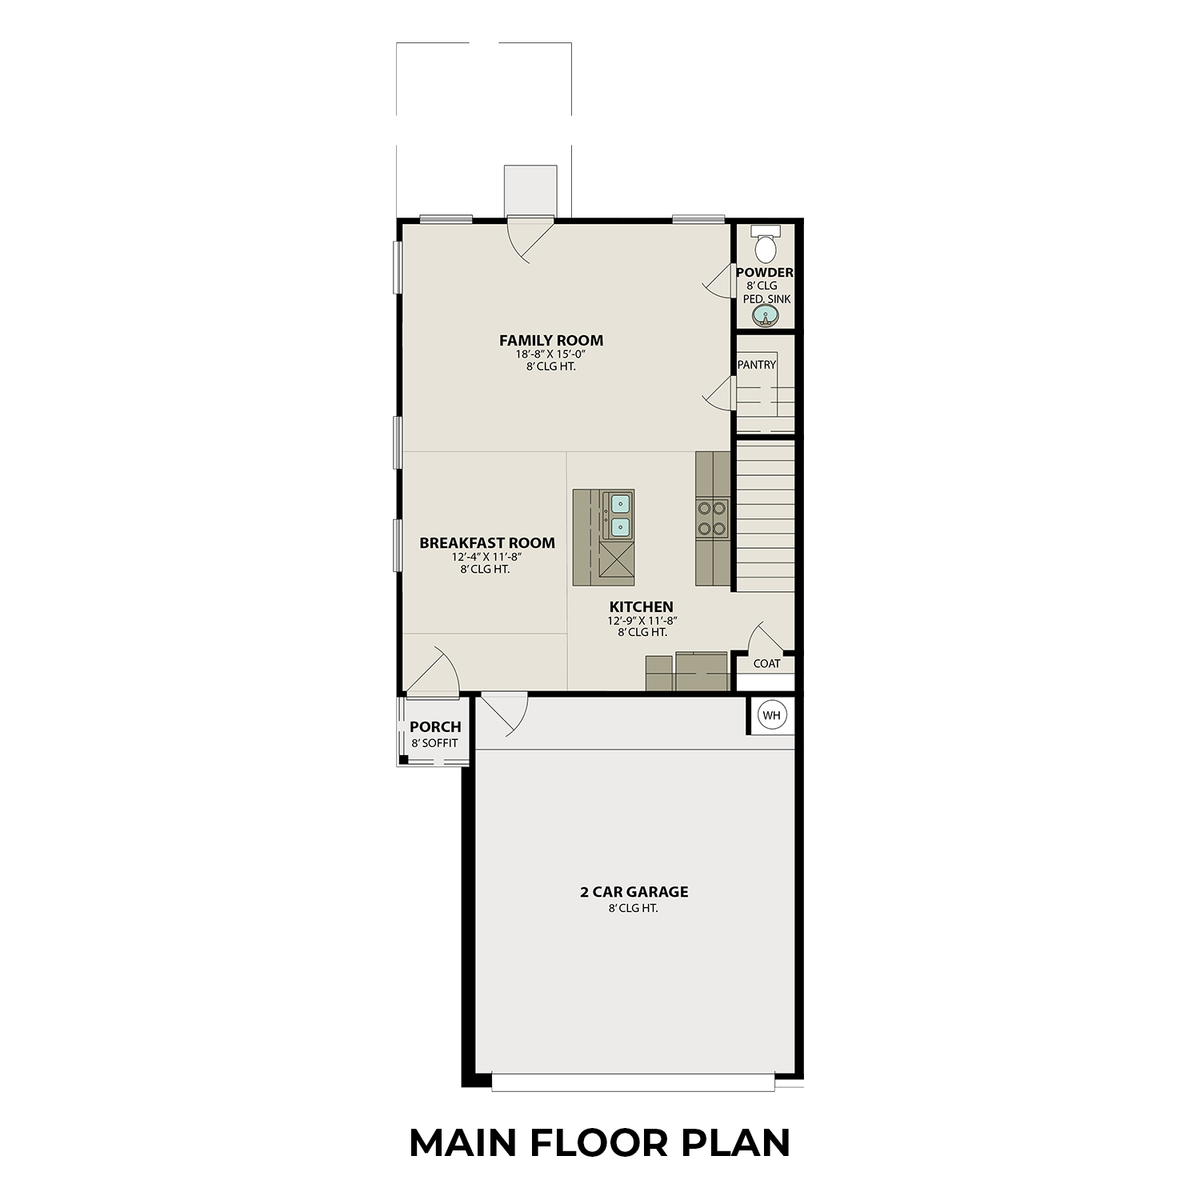 1 - The Lily B floor plan layout for 5259 Shallowhurst Lane in Davidson Homes' Haven at Kieth Harrow community.